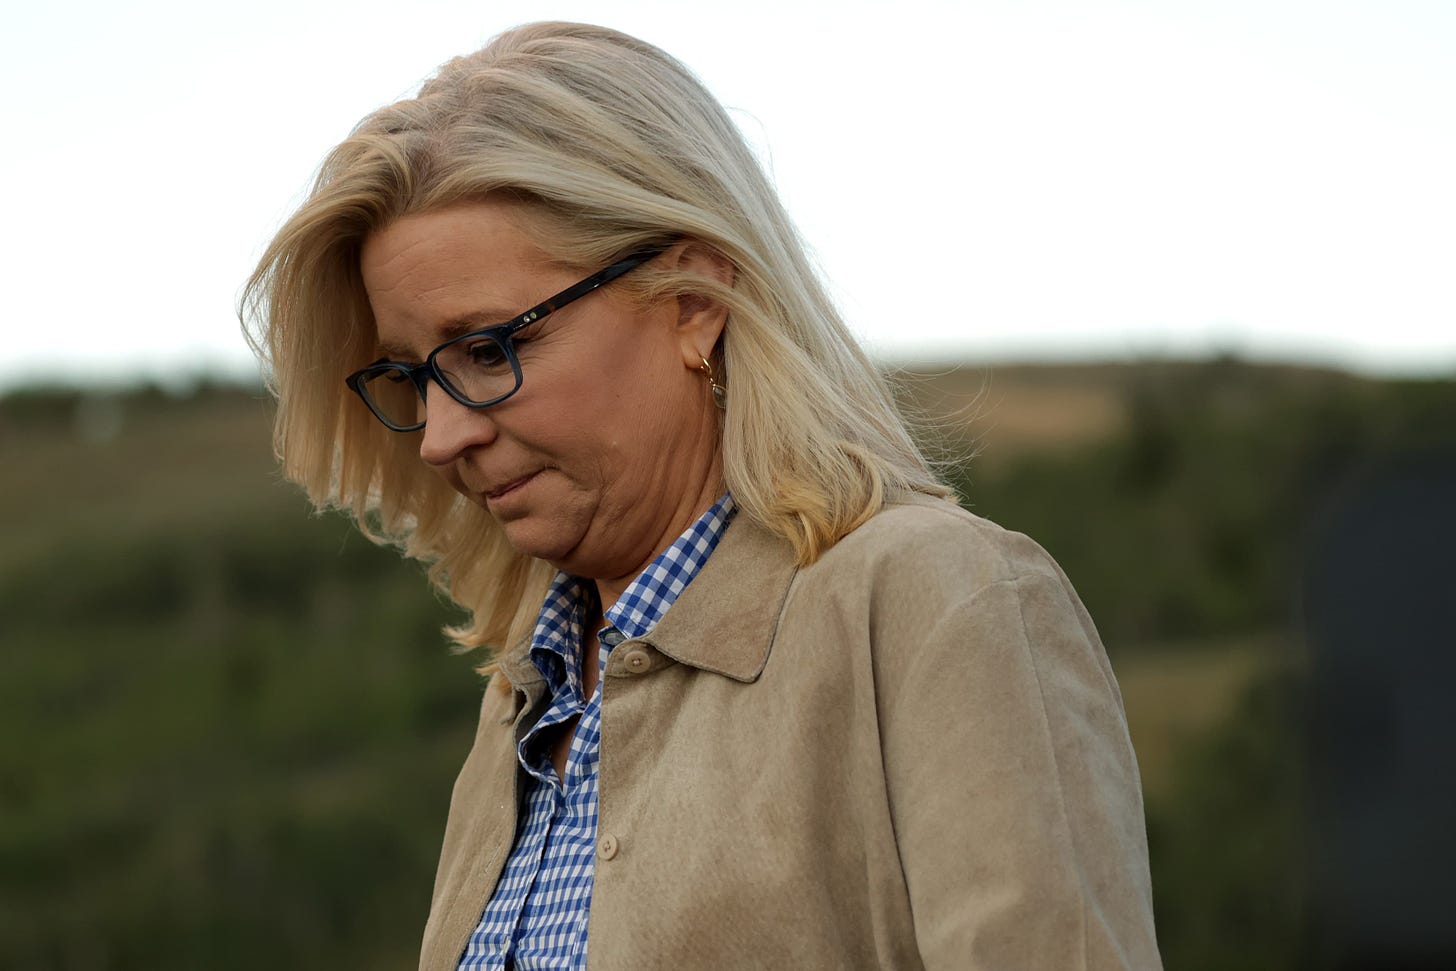 Rep. Liz Cheney loses GOP primary to Trump-backed challenger, NBC projects